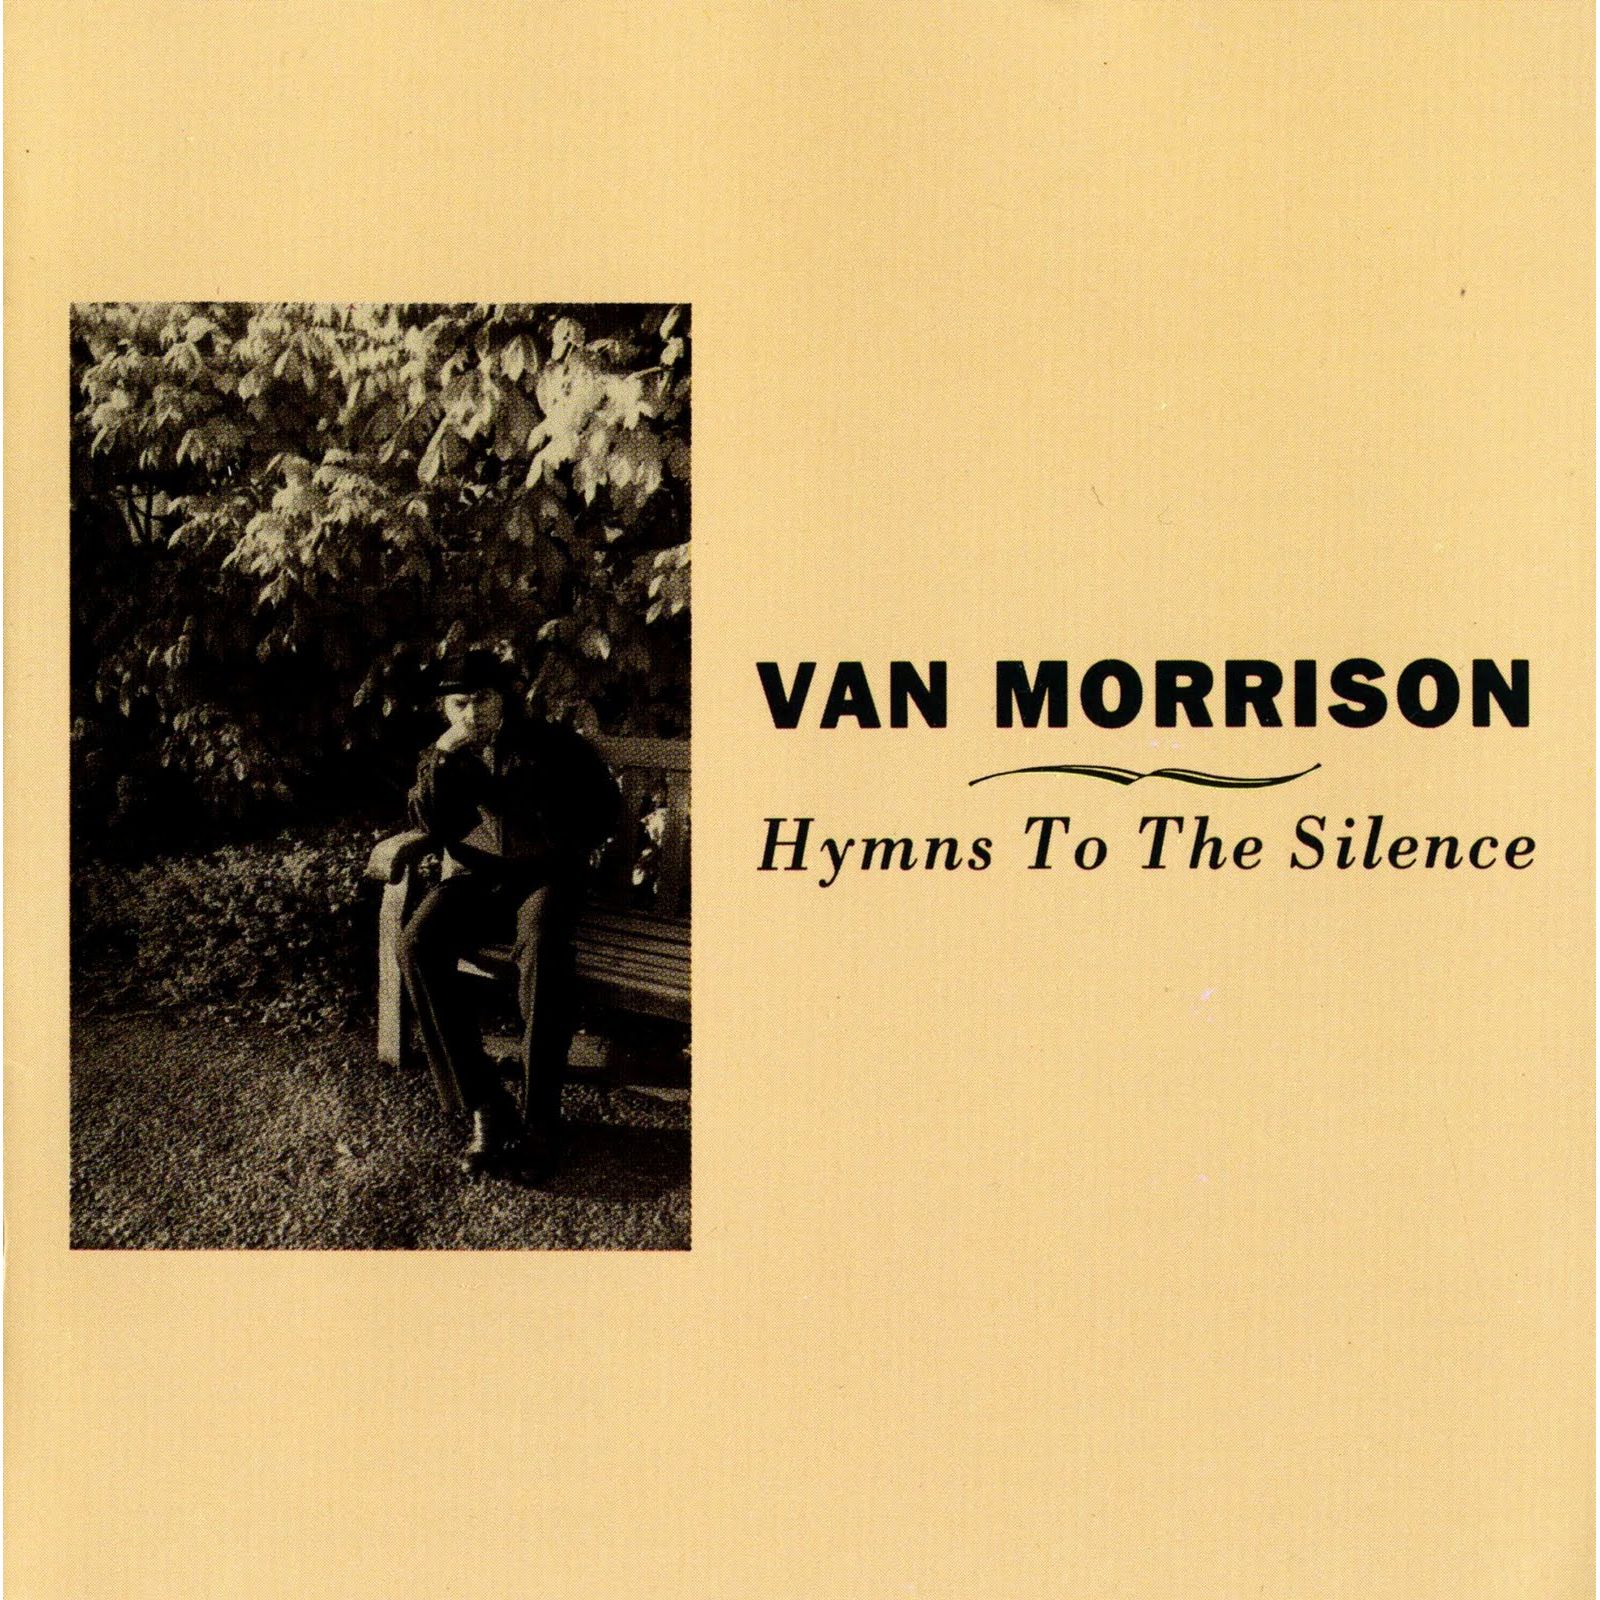 Van Morrison Hymns to the Silence